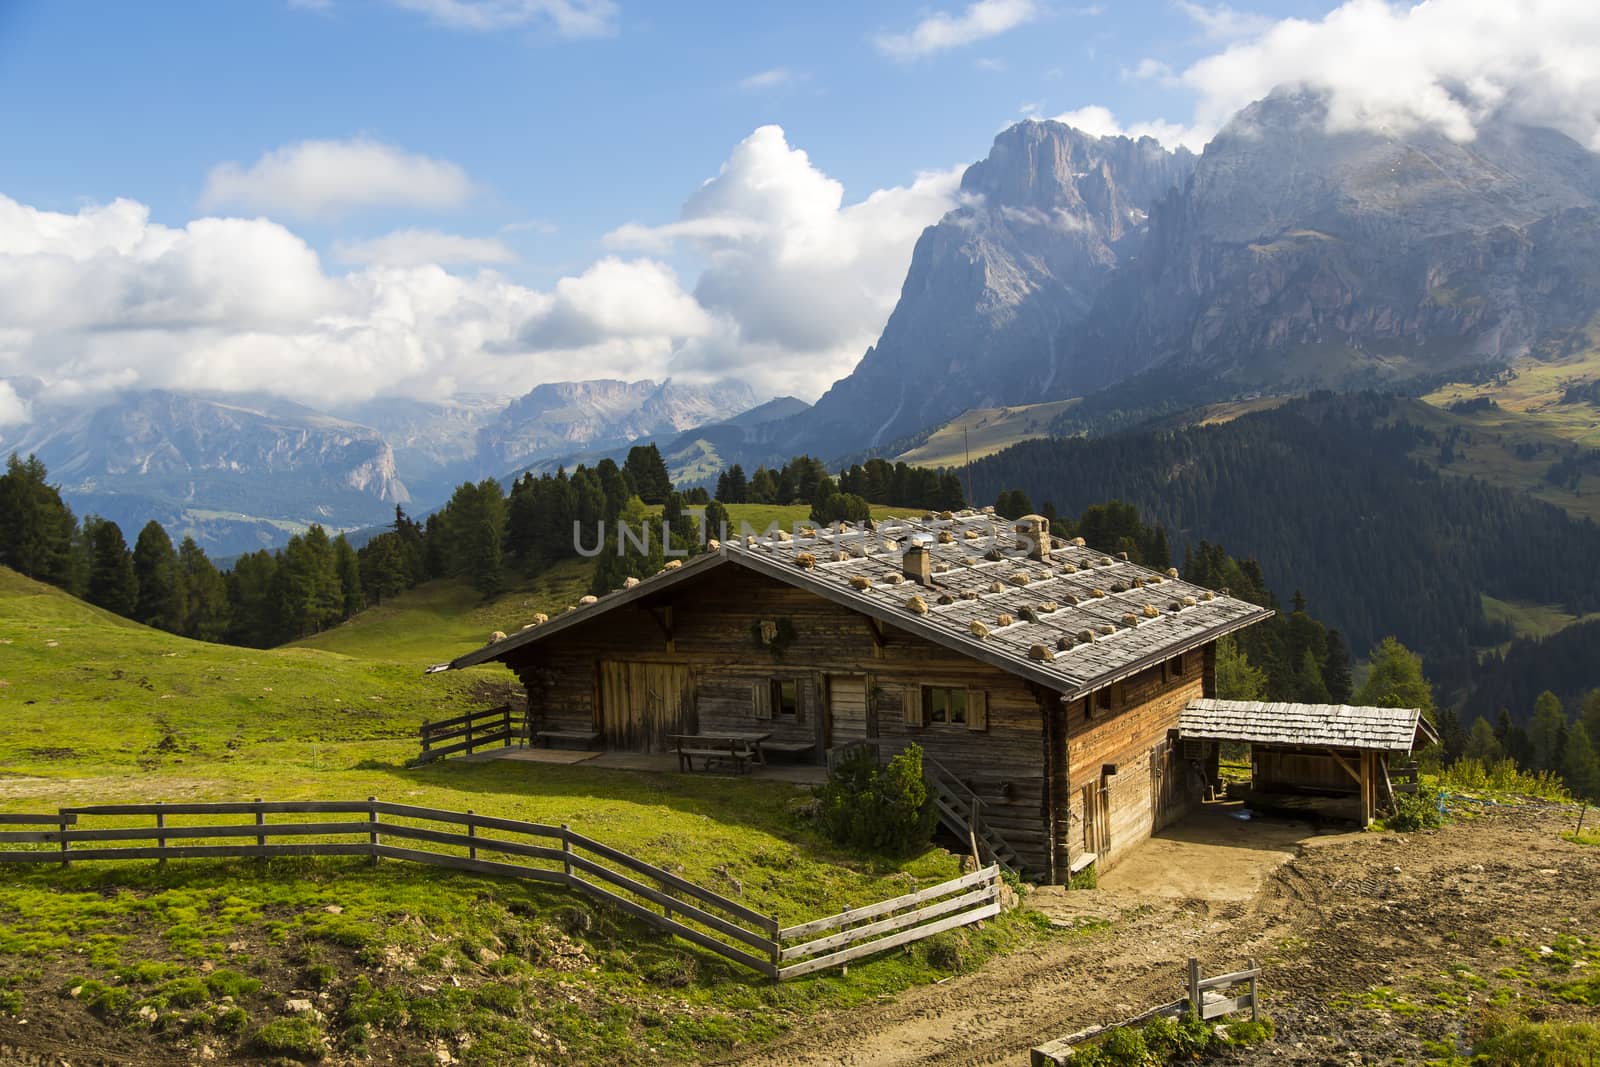 View of a mountain hut on a sunny day with mountains in the background